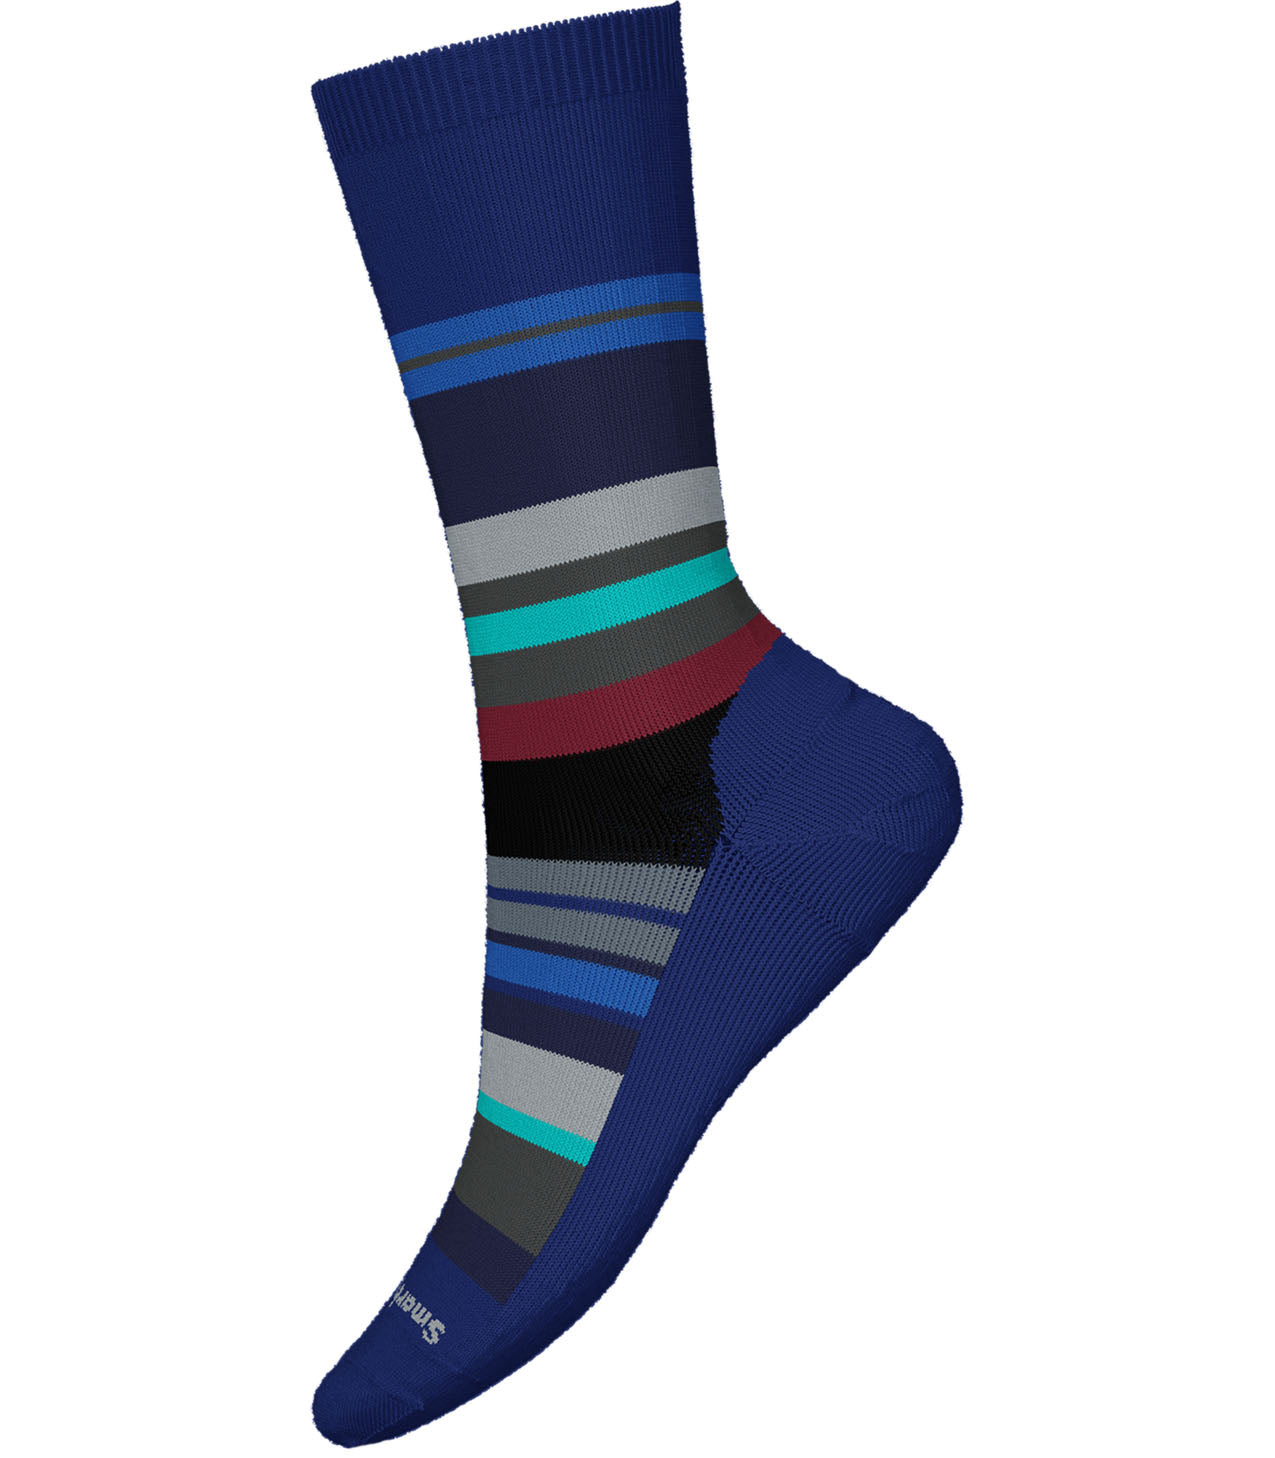 Men's Smartwool Saturnsphere Sock in Alpine Blue from the side view